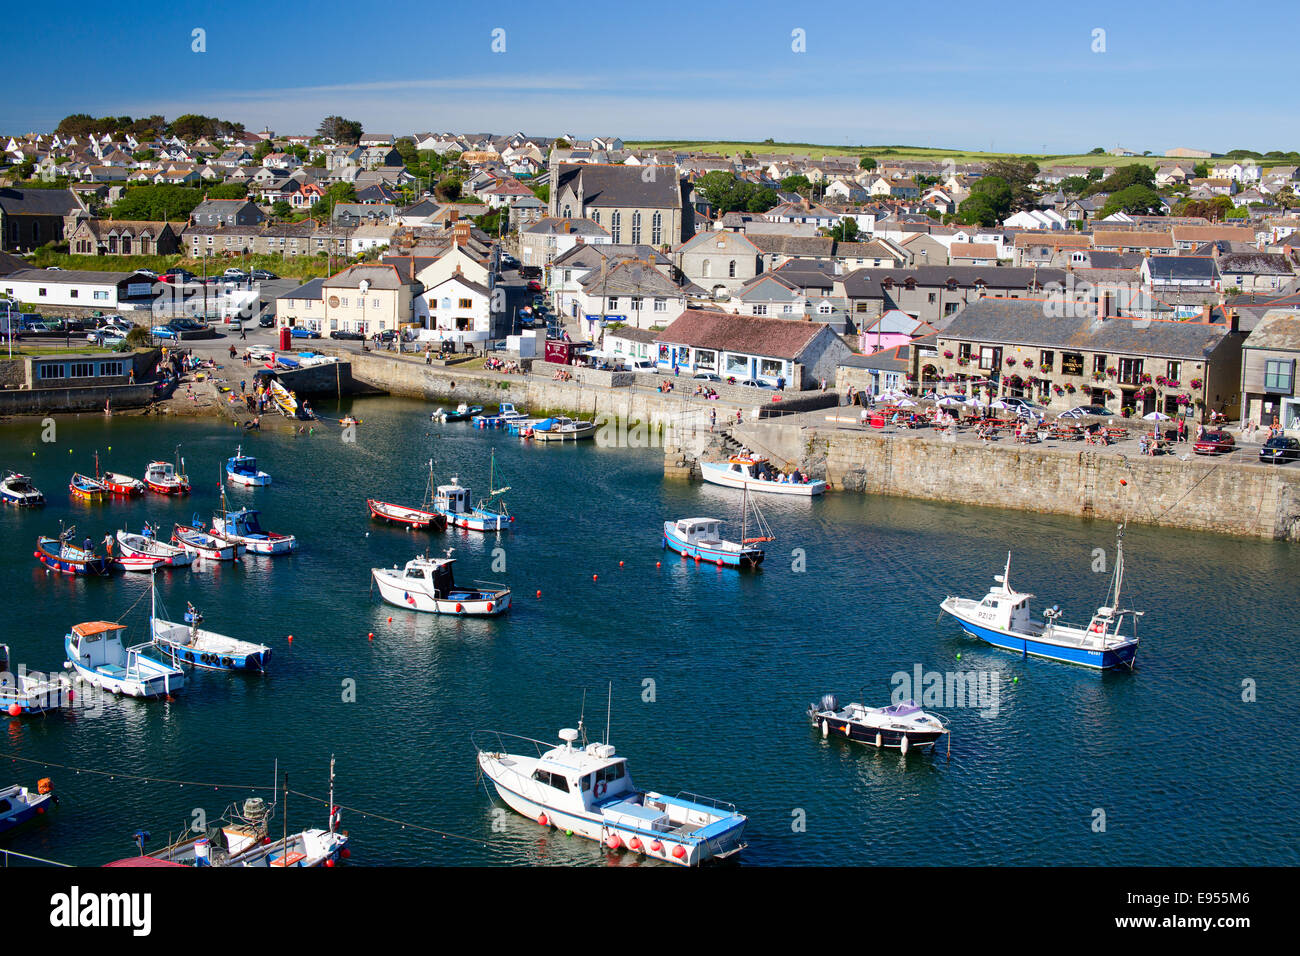 Porthleven harbour with small fishing and pleasure boats, the quay and town is spread behind, Cornwall, England, UK. Stock Photo